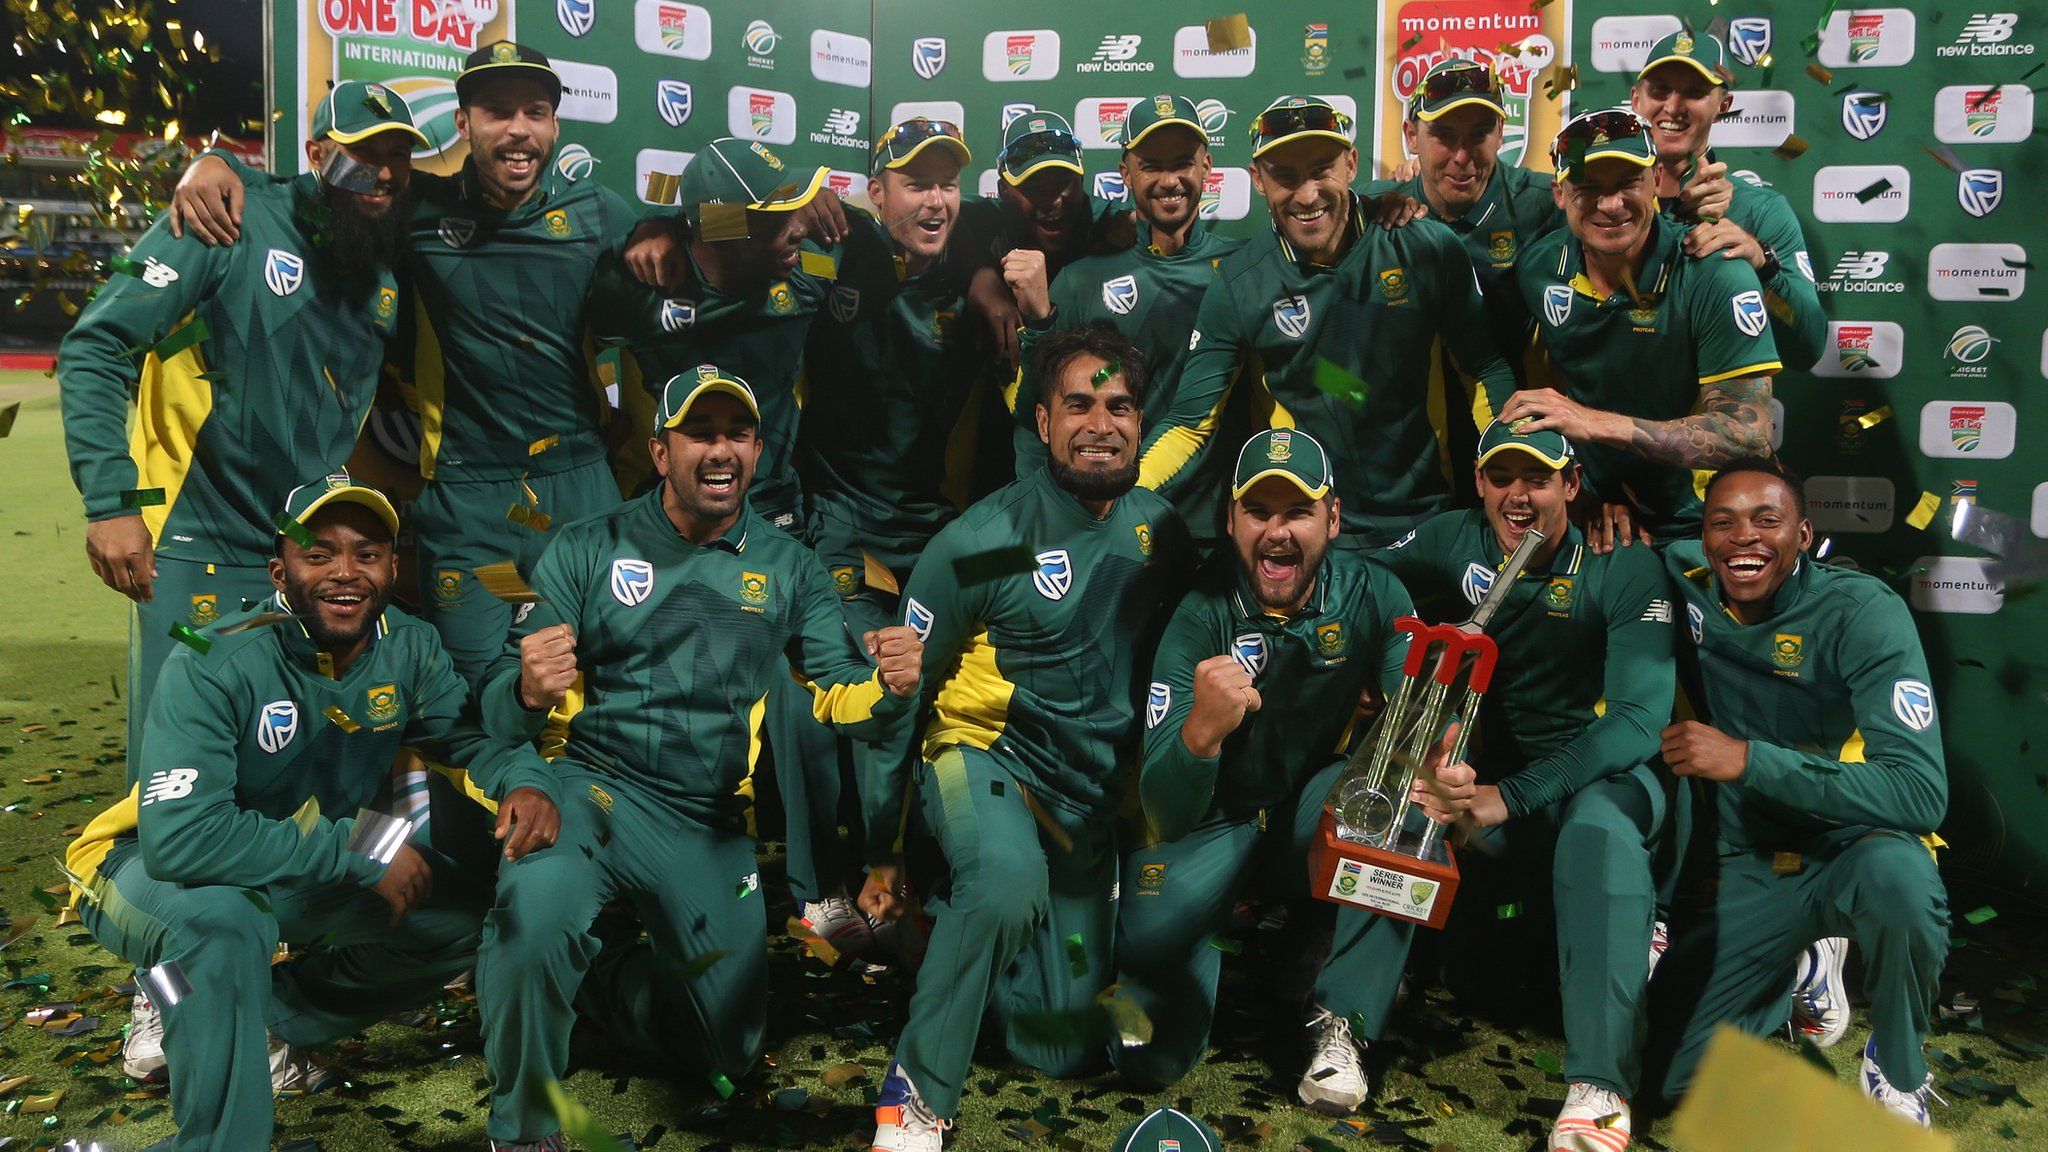 South Africa with the one-day series trophy